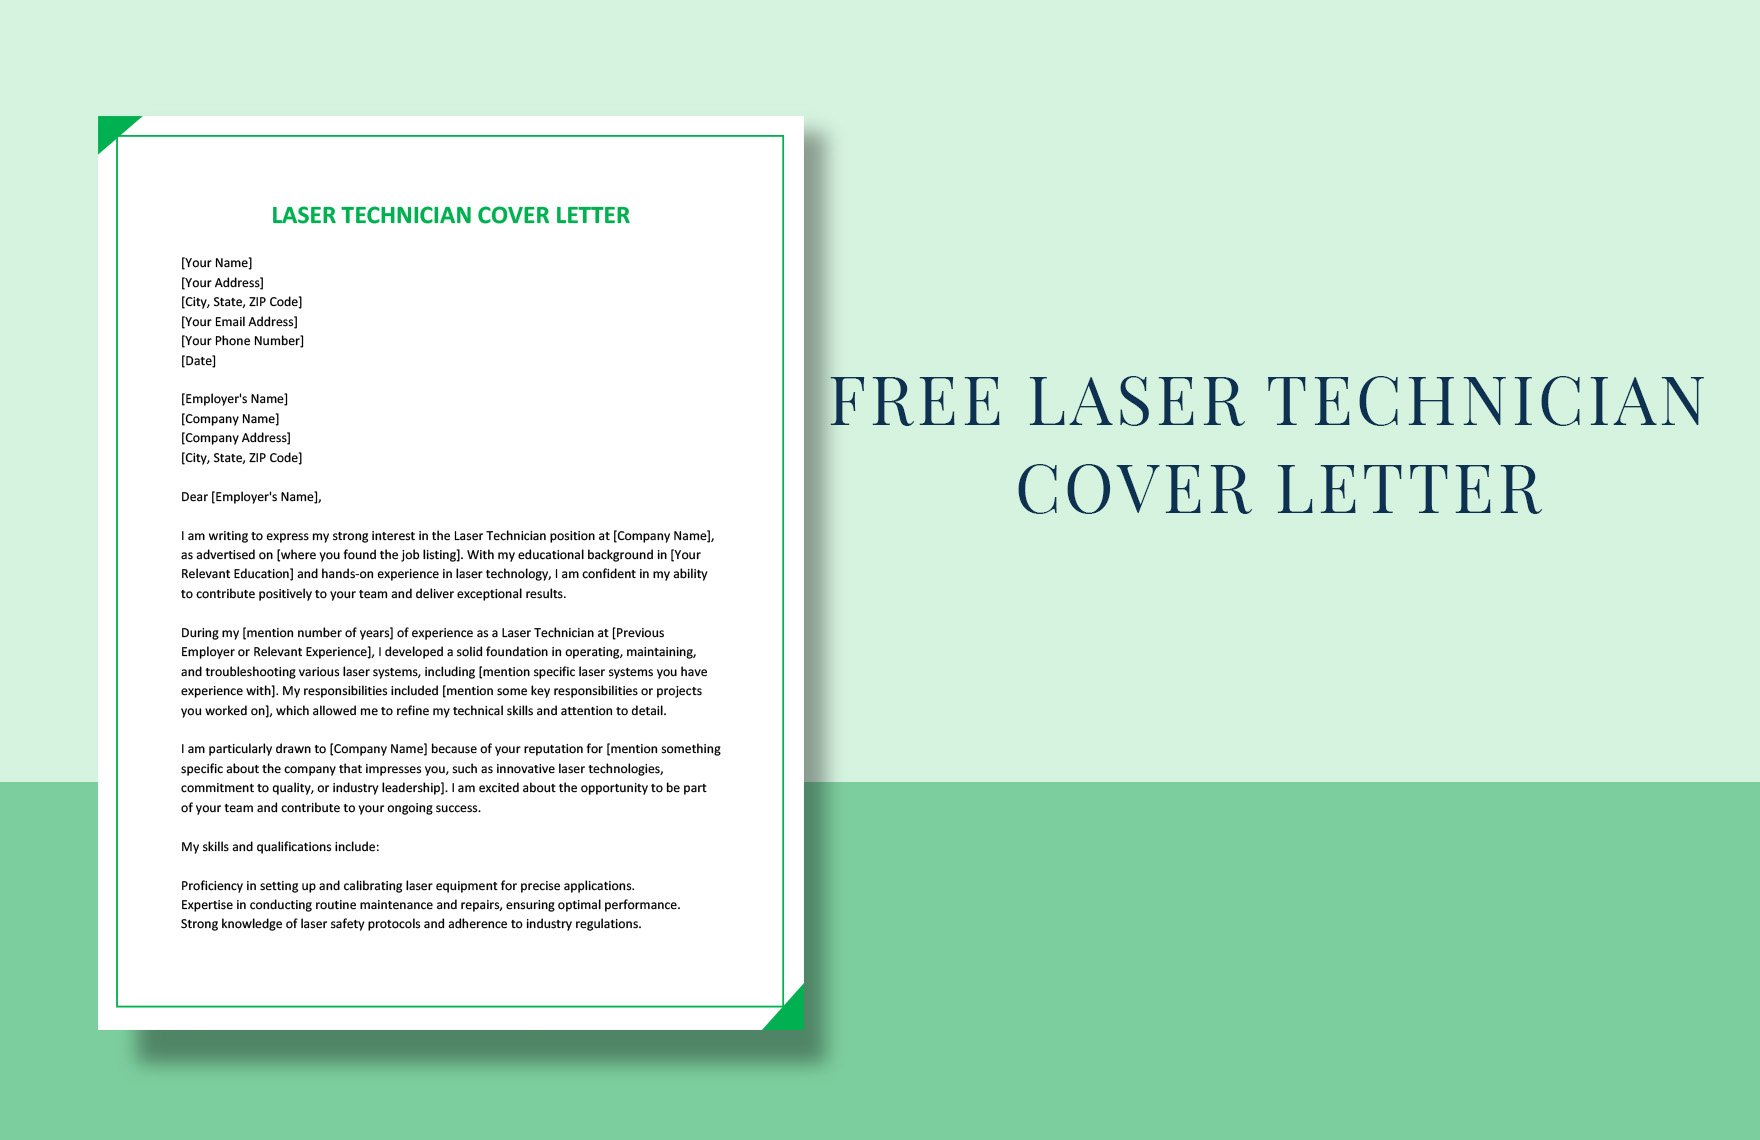 Laser Technician Cover Letter in Word, Google Docs